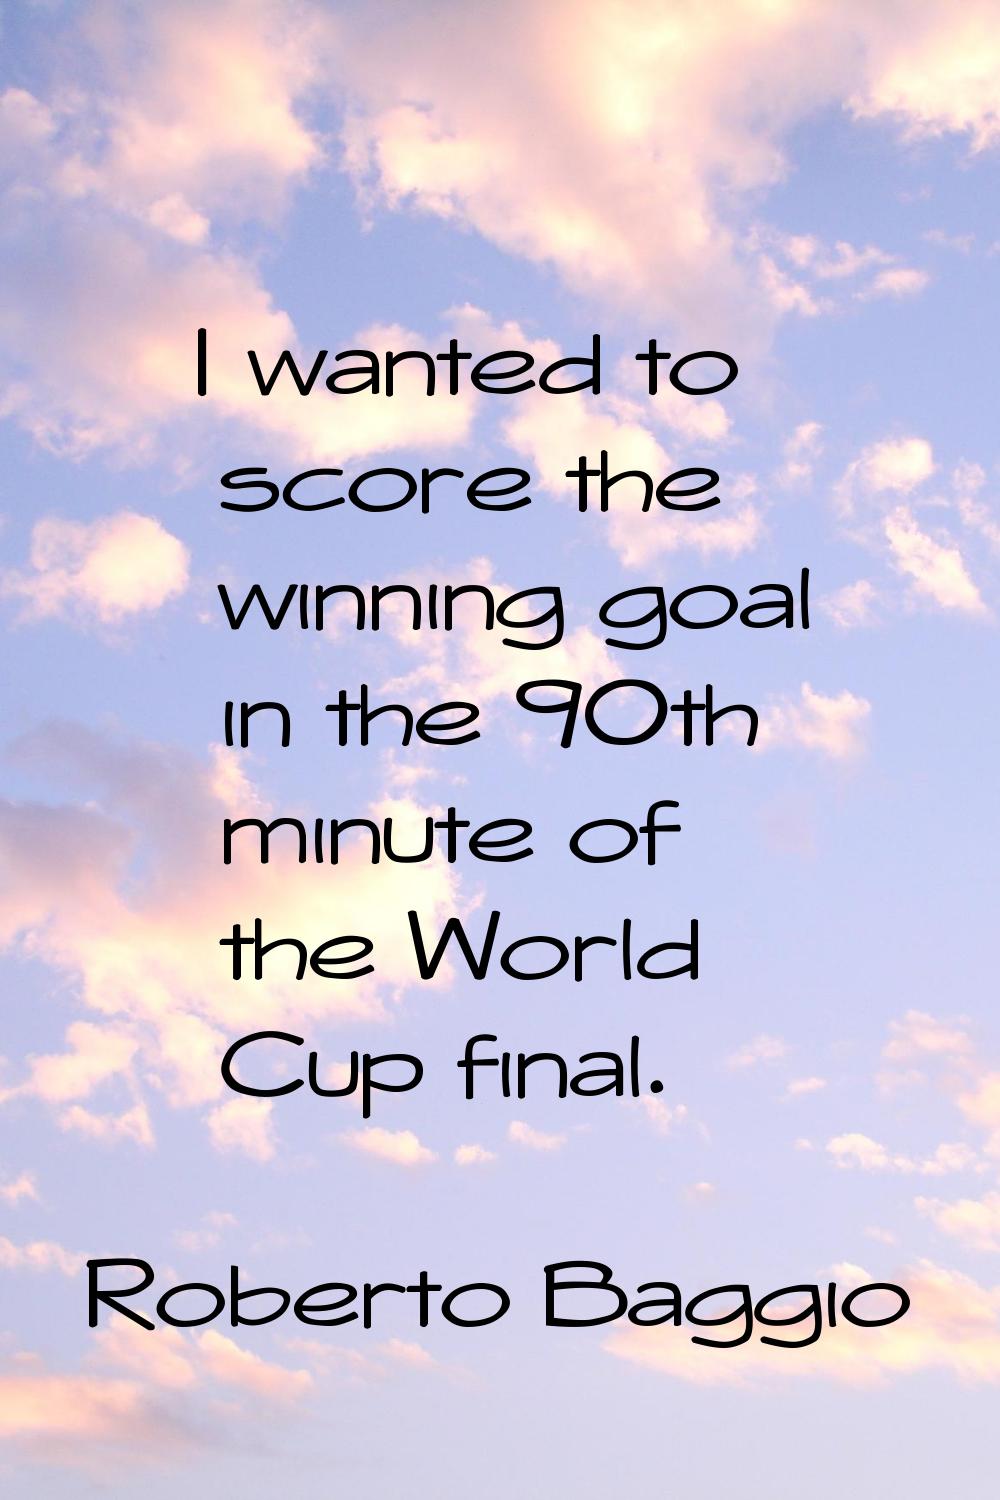 I wanted to score the winning goal in the 90th minute of the World Cup final.